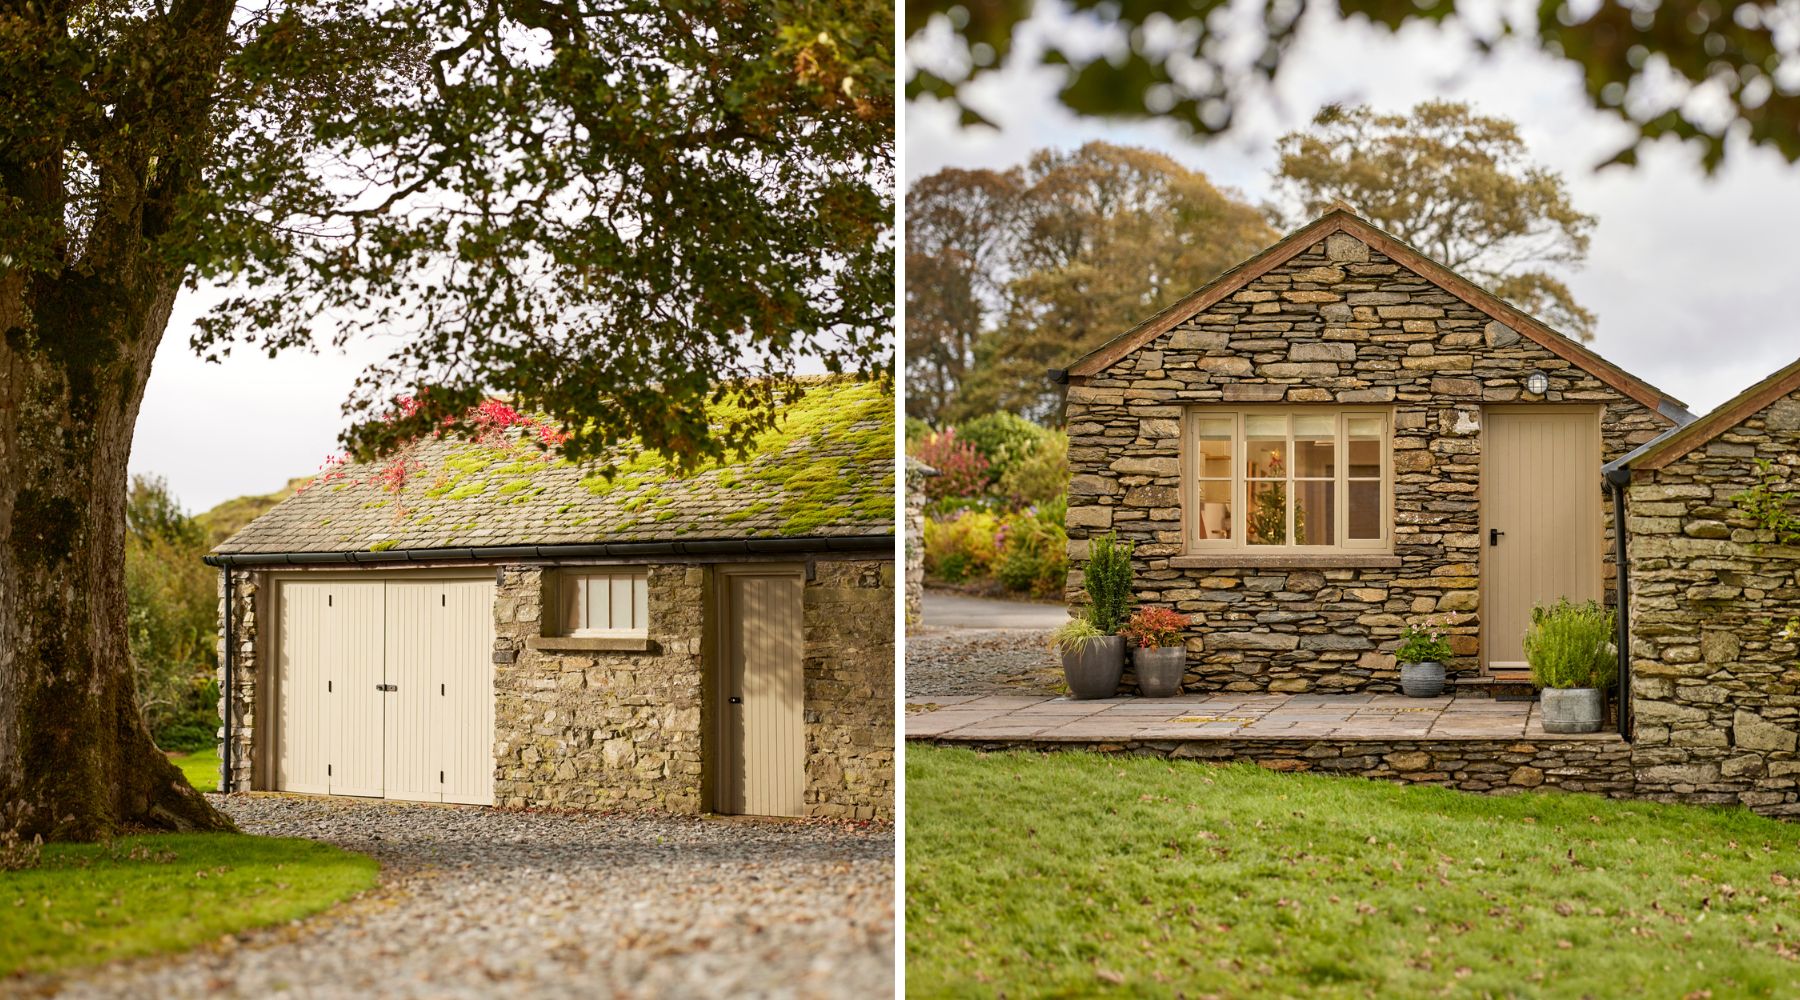 Omaze Million Pound House Lake District - Traditional stone annex building and stable framed by mature trees